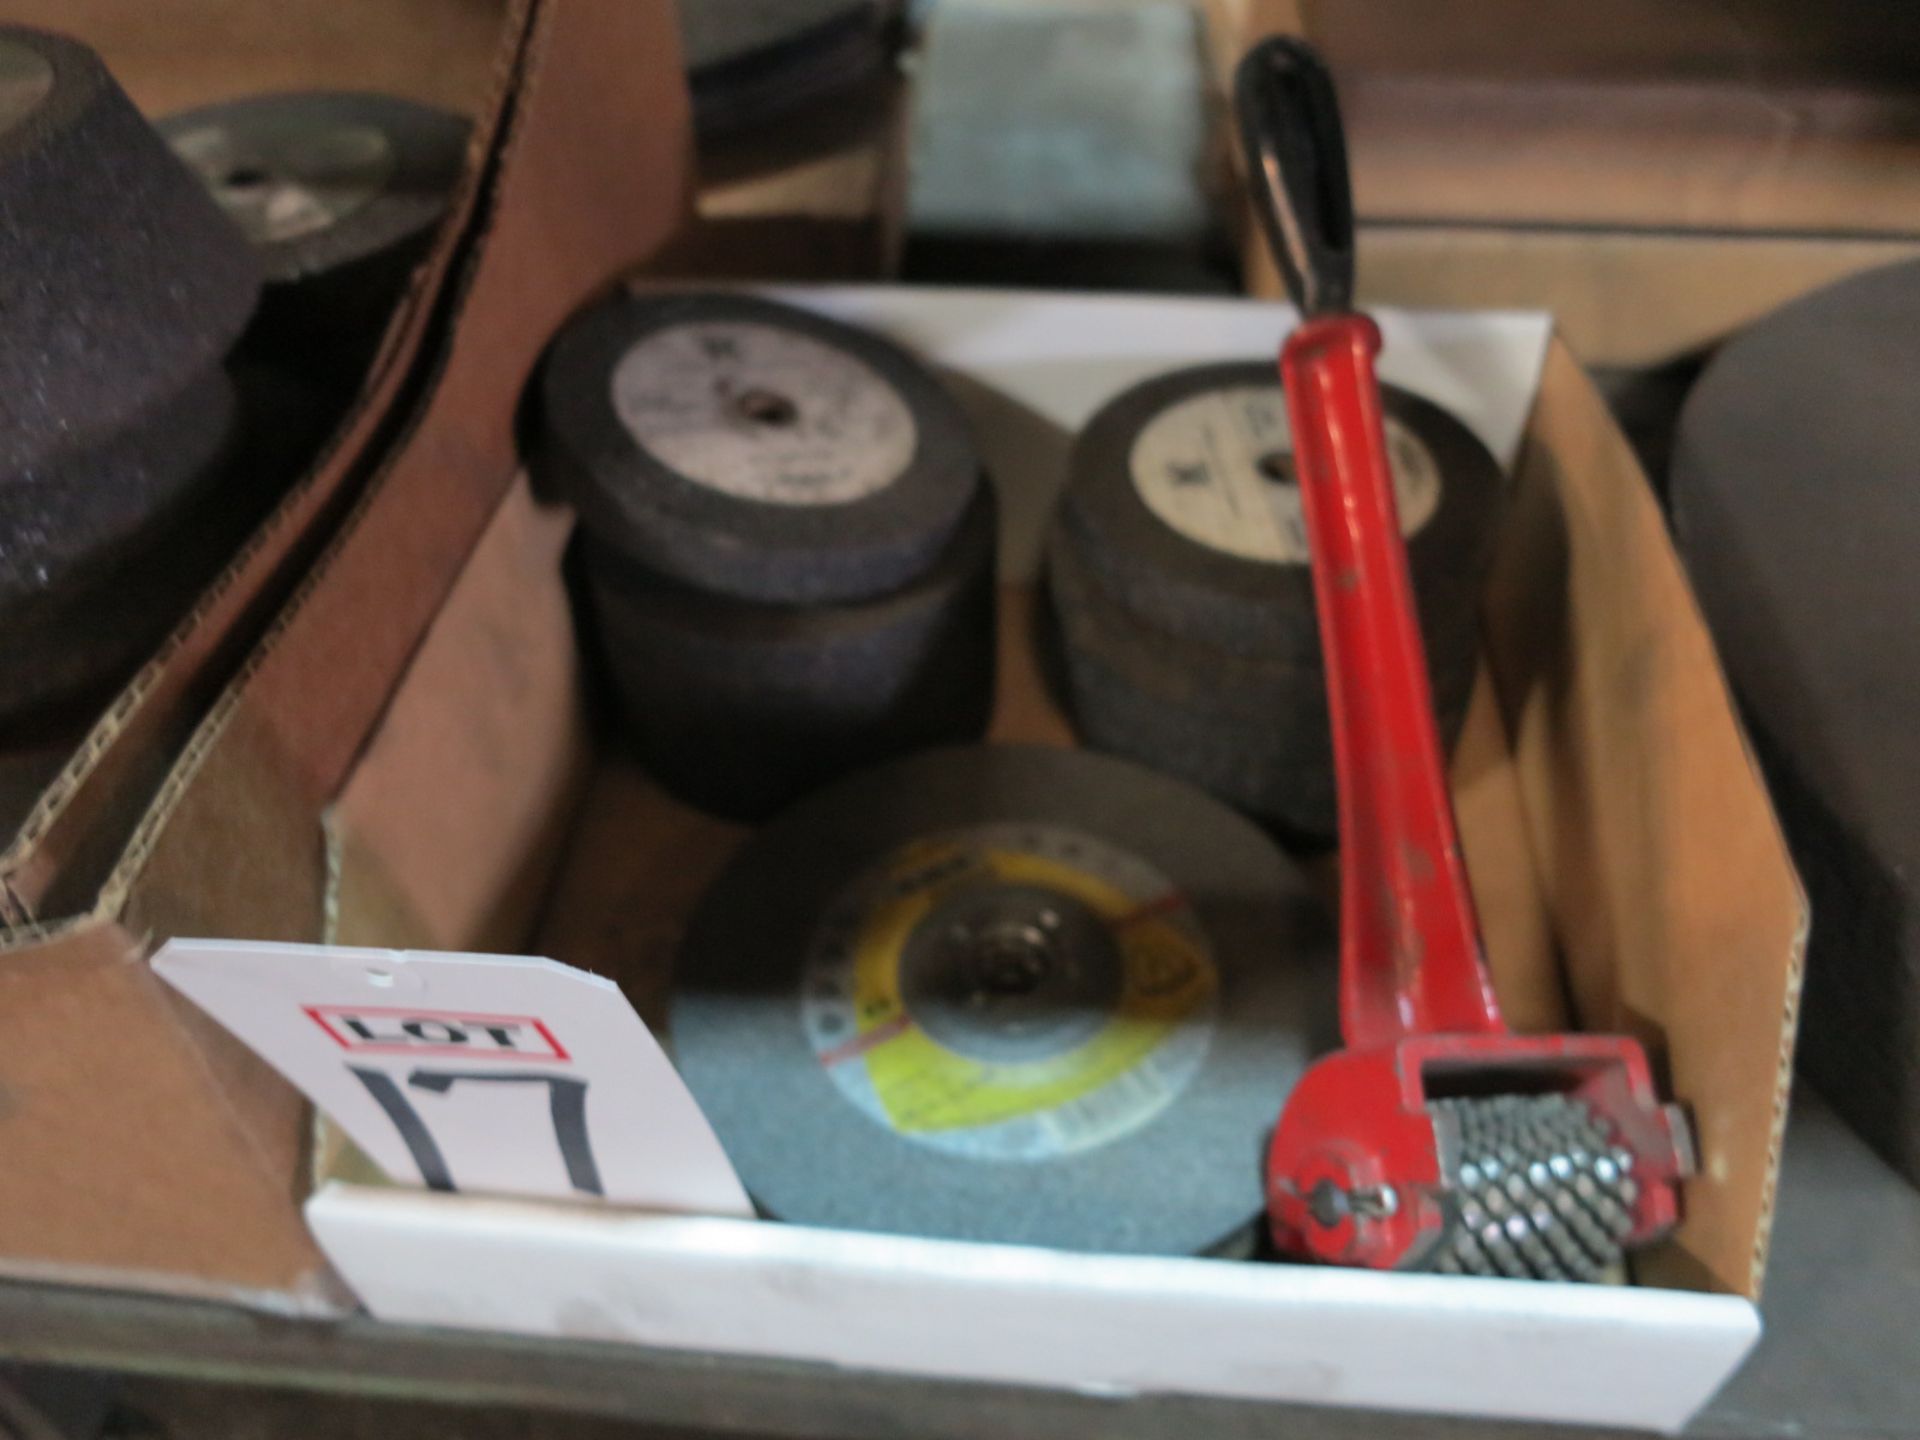 LOT - GRINDING WHEELS: 5" X 3/4" X 1/2" AND 7" X 1/4" X 7/8"